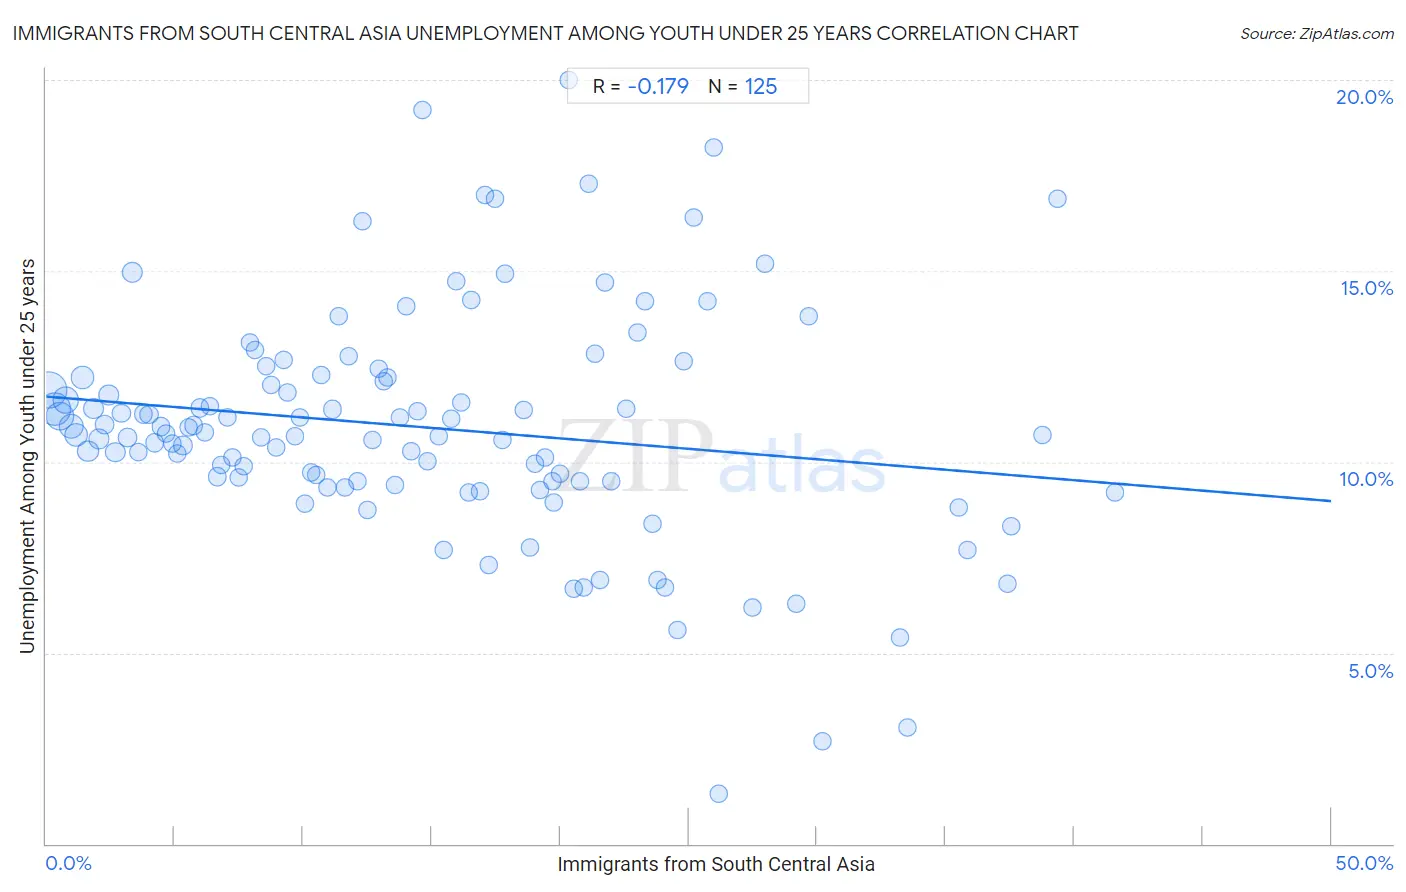 Immigrants from South Central Asia Unemployment Among Youth under 25 years